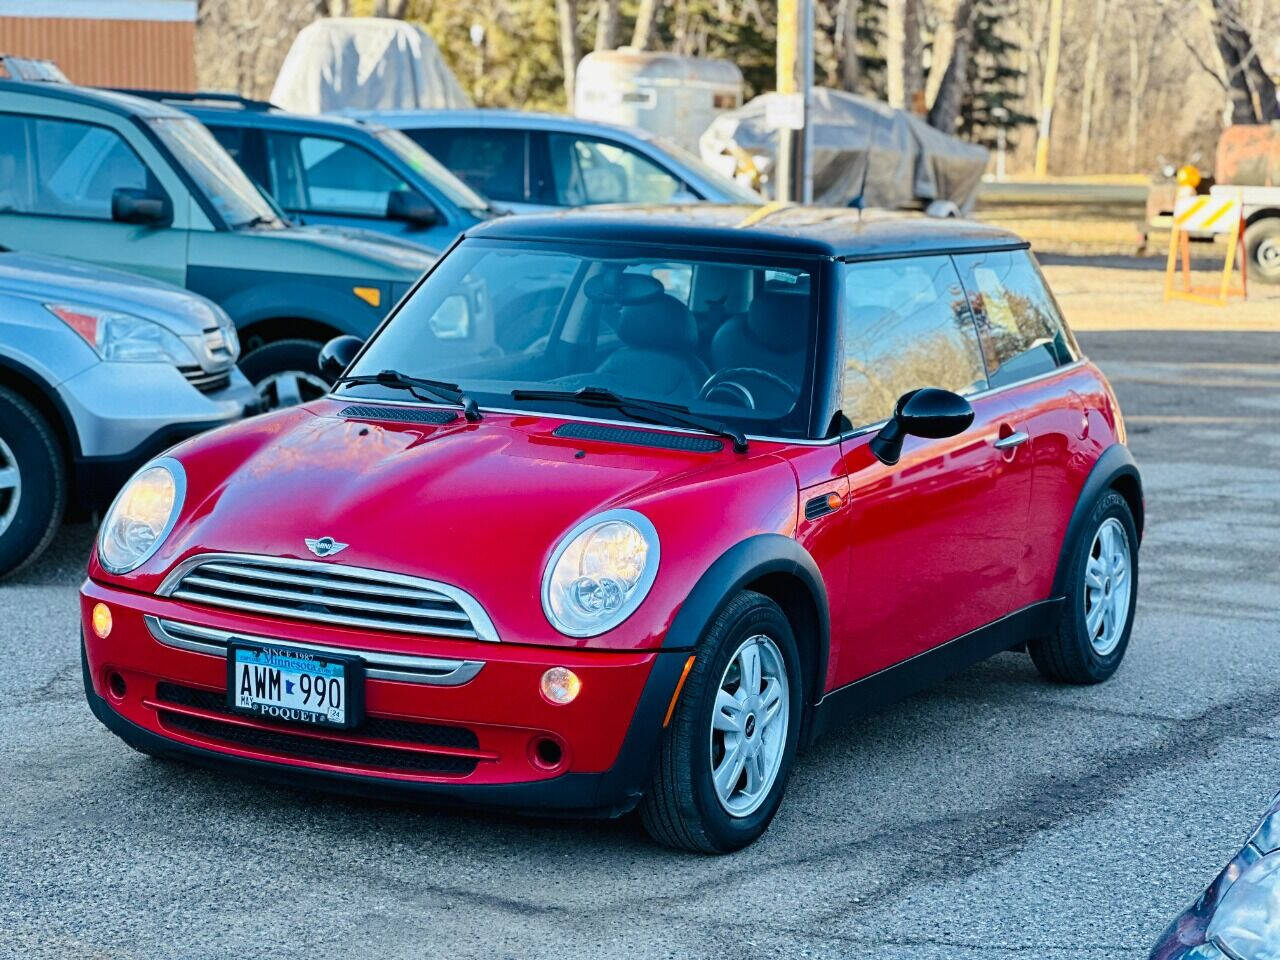 2006 MINI Cooper : Latest Prices, Reviews, Specs, Photos and Incentives